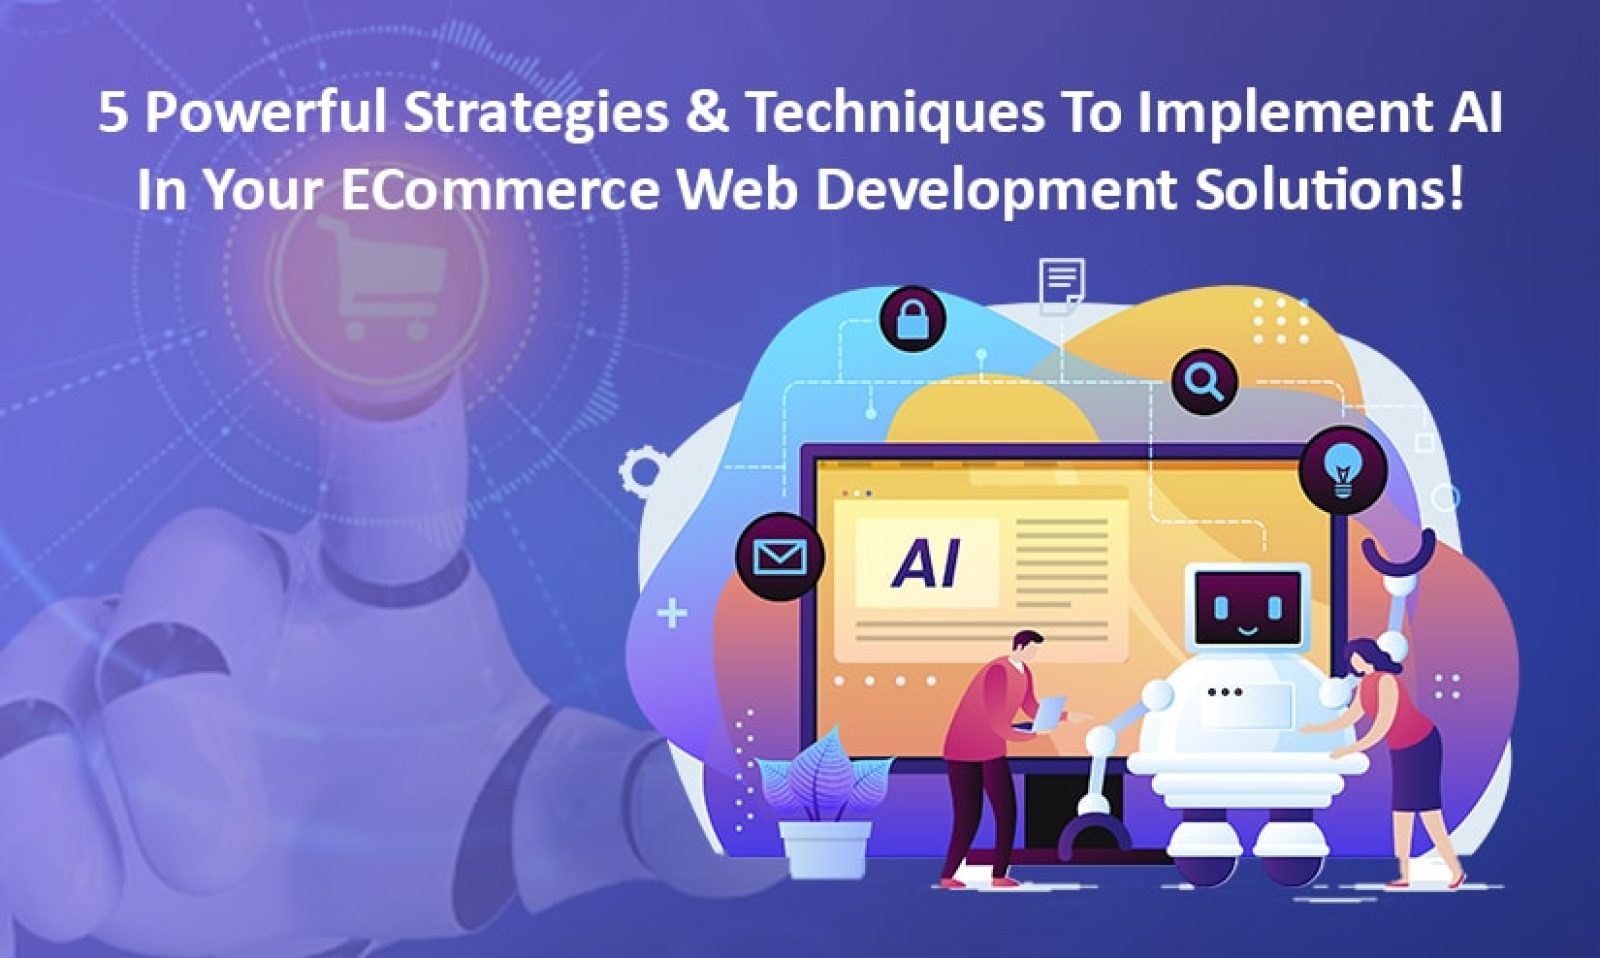 5 Powerful Strategies & Techniques To Implement AI In Your ECommerce Web Development Solutions!